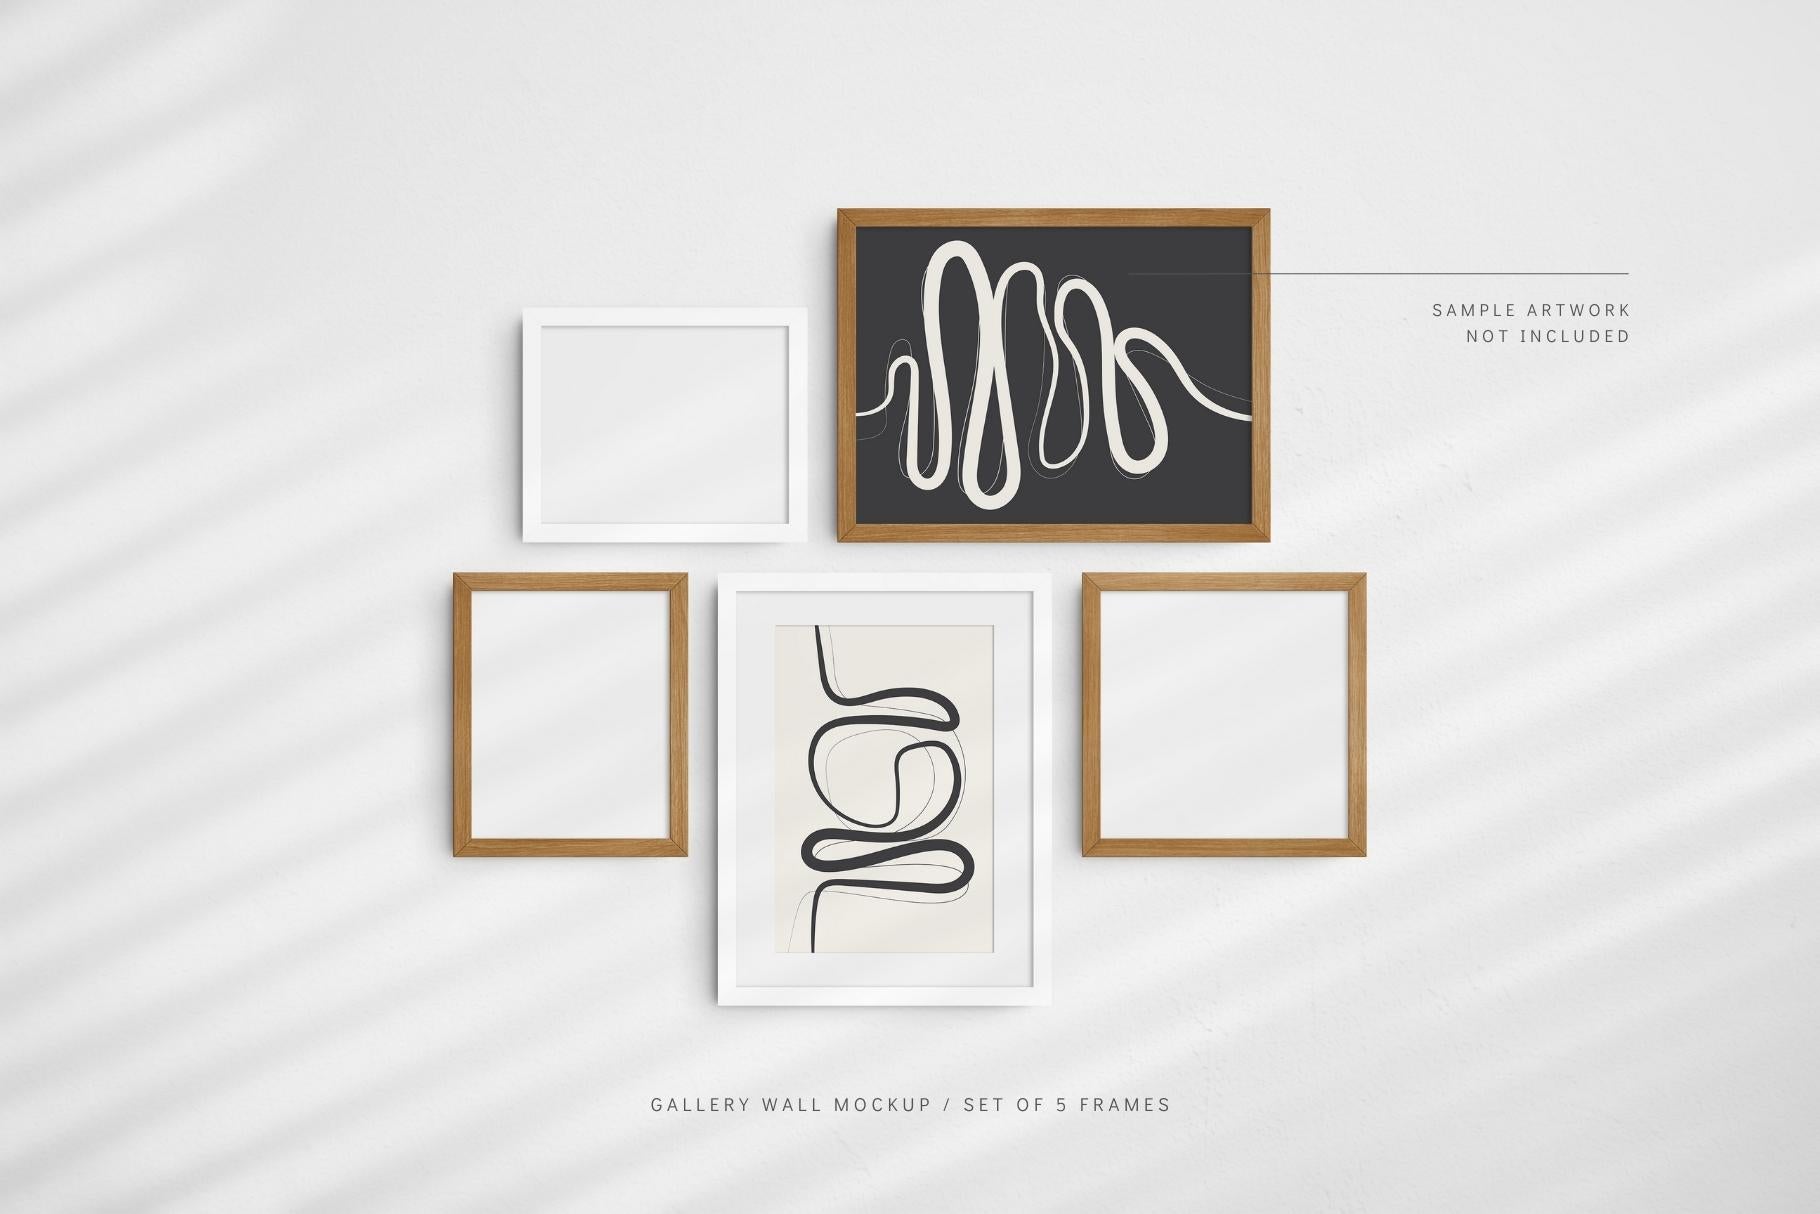 Gallery Wall Mockup | Set of 5 Frames | Frame Mockup | PSD | Editable Frame Colors and Texture